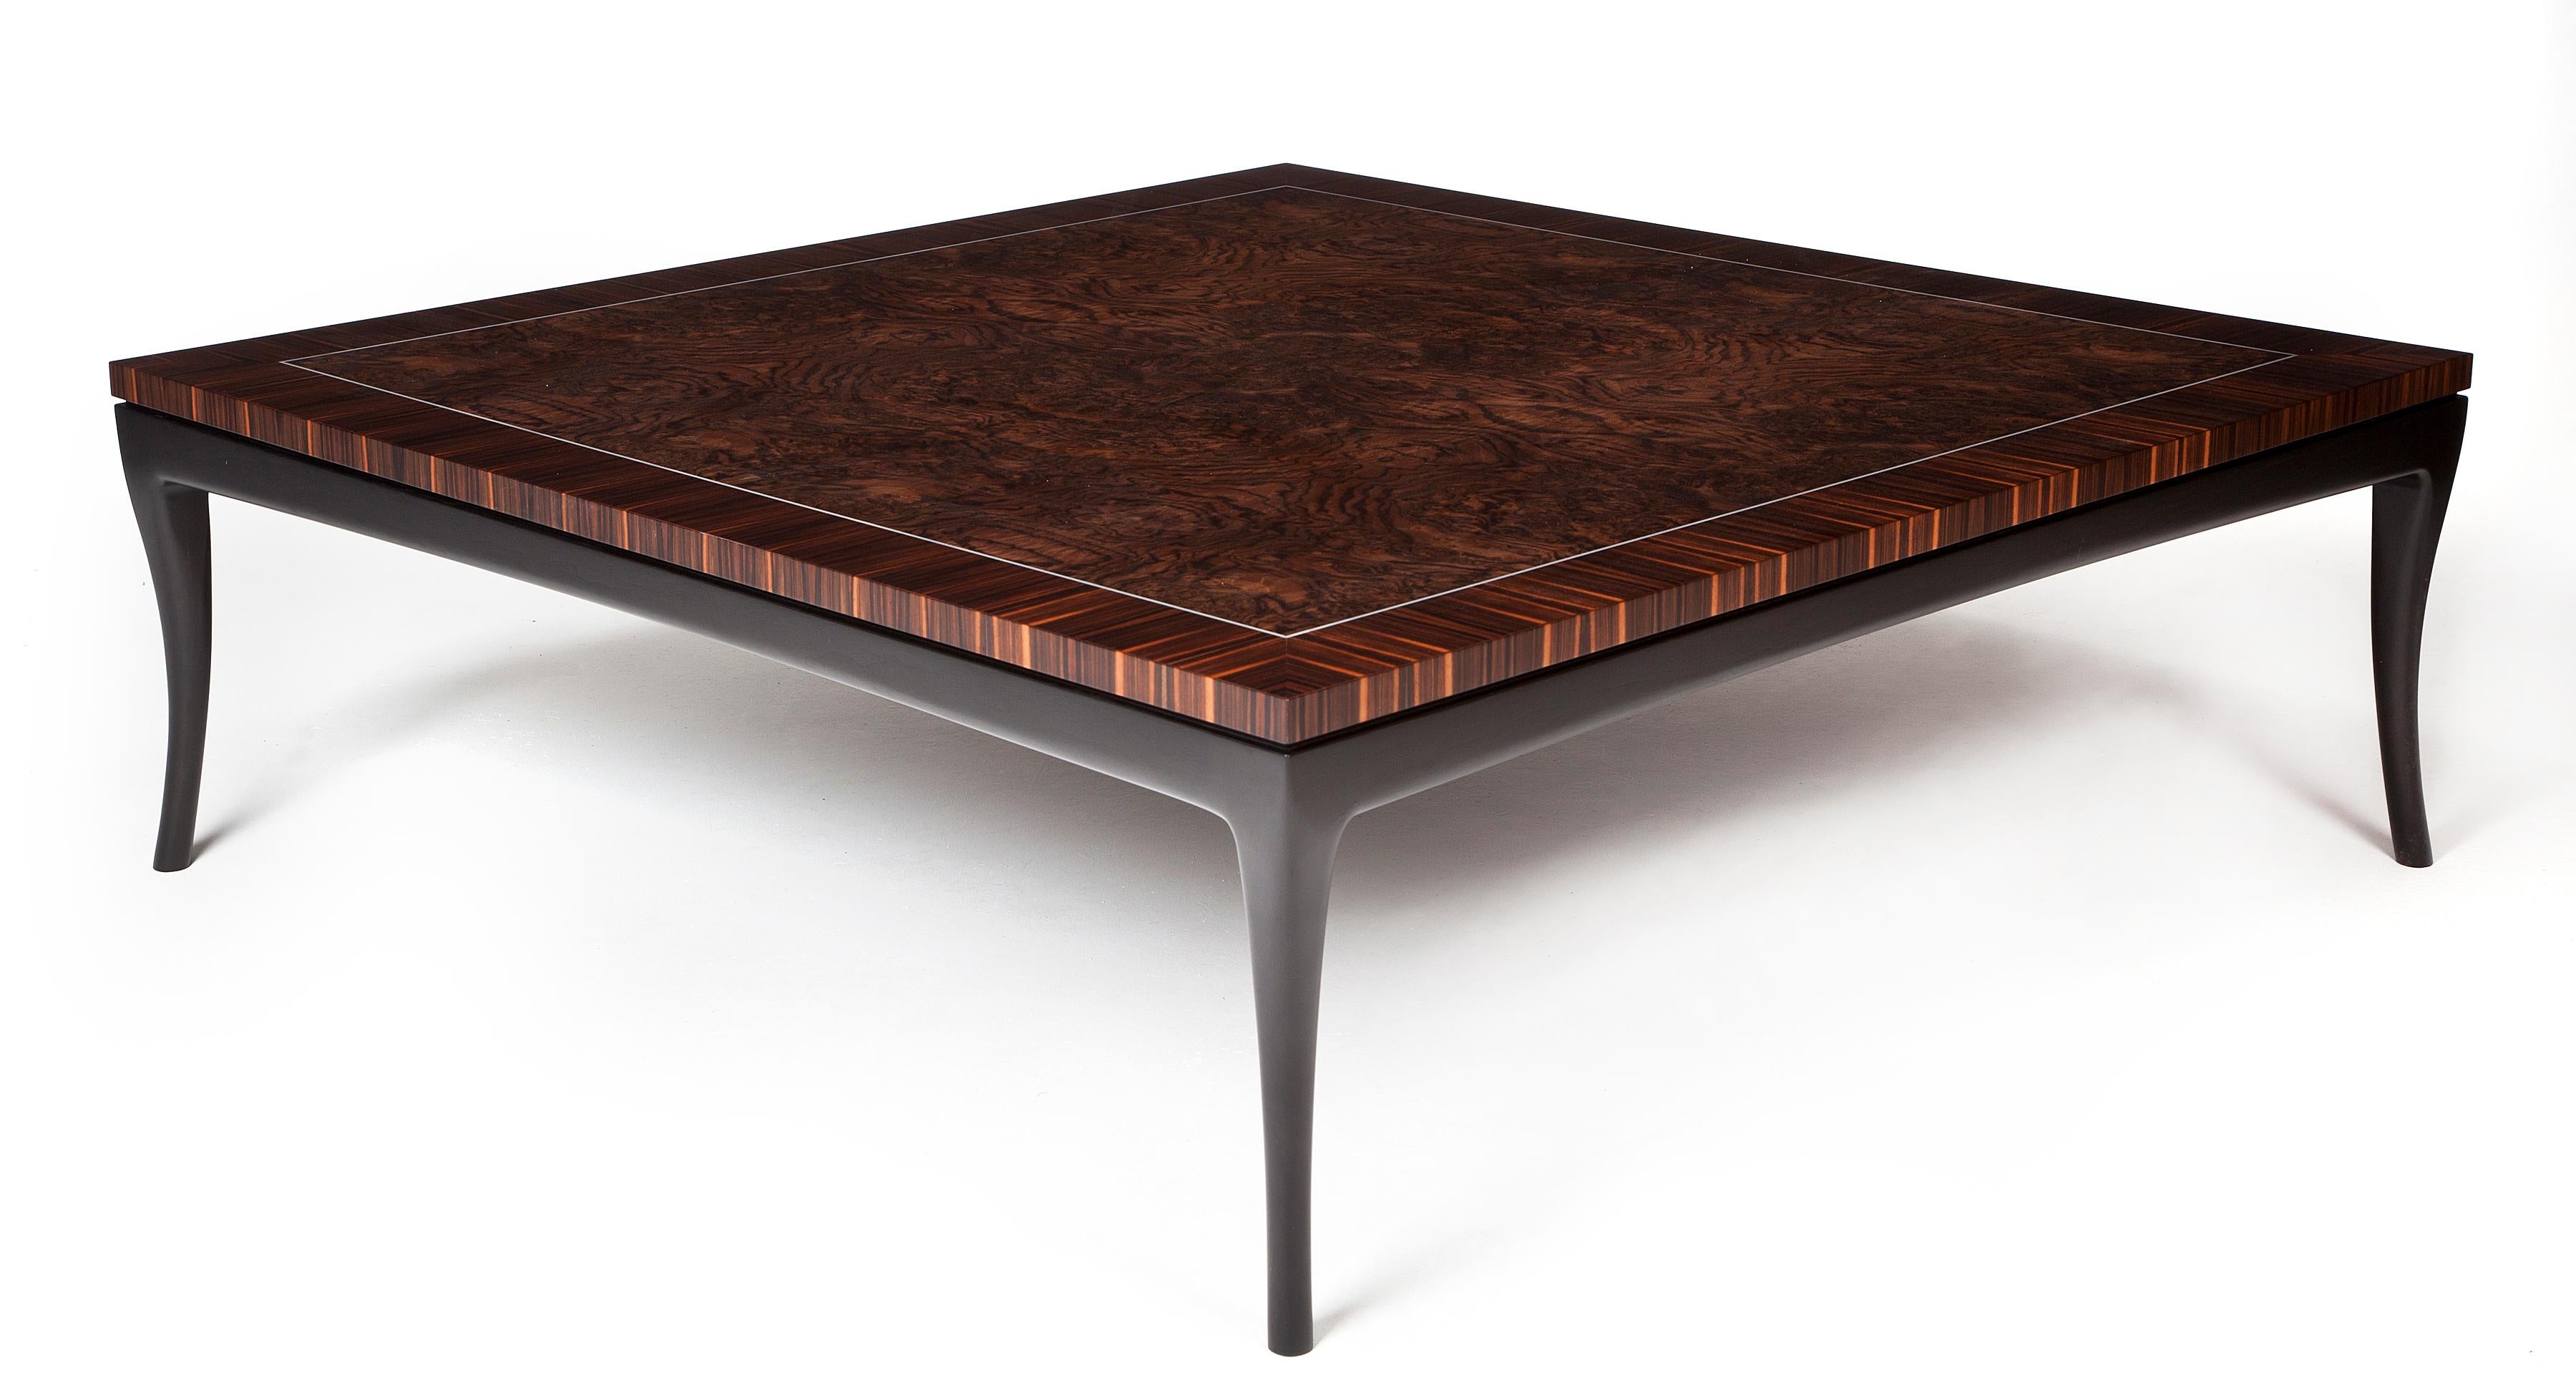 Deco-inspired large and modern coffee table in Macassar ebony and burr walnut with a white metal inlay. The tabletop sits on a blackened frame with elegantly carved black legs.

Originally designed for clients with Art Deco interior styling, along